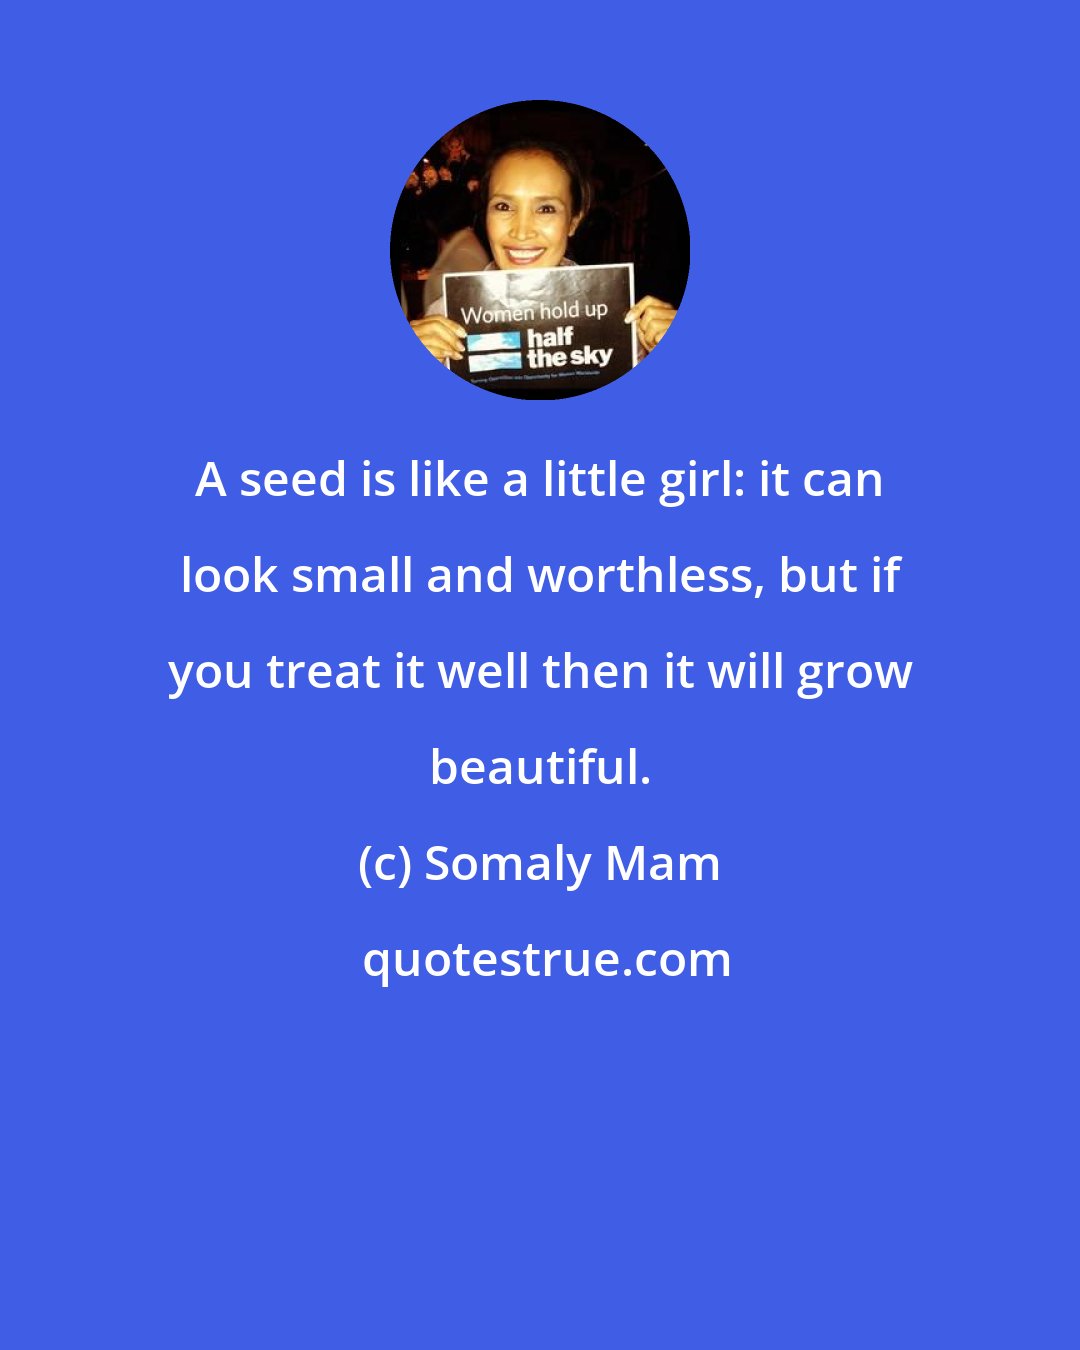 Somaly Mam: A seed is like a little girl: it can look small and worthless, but if you treat it well then it will grow beautiful.